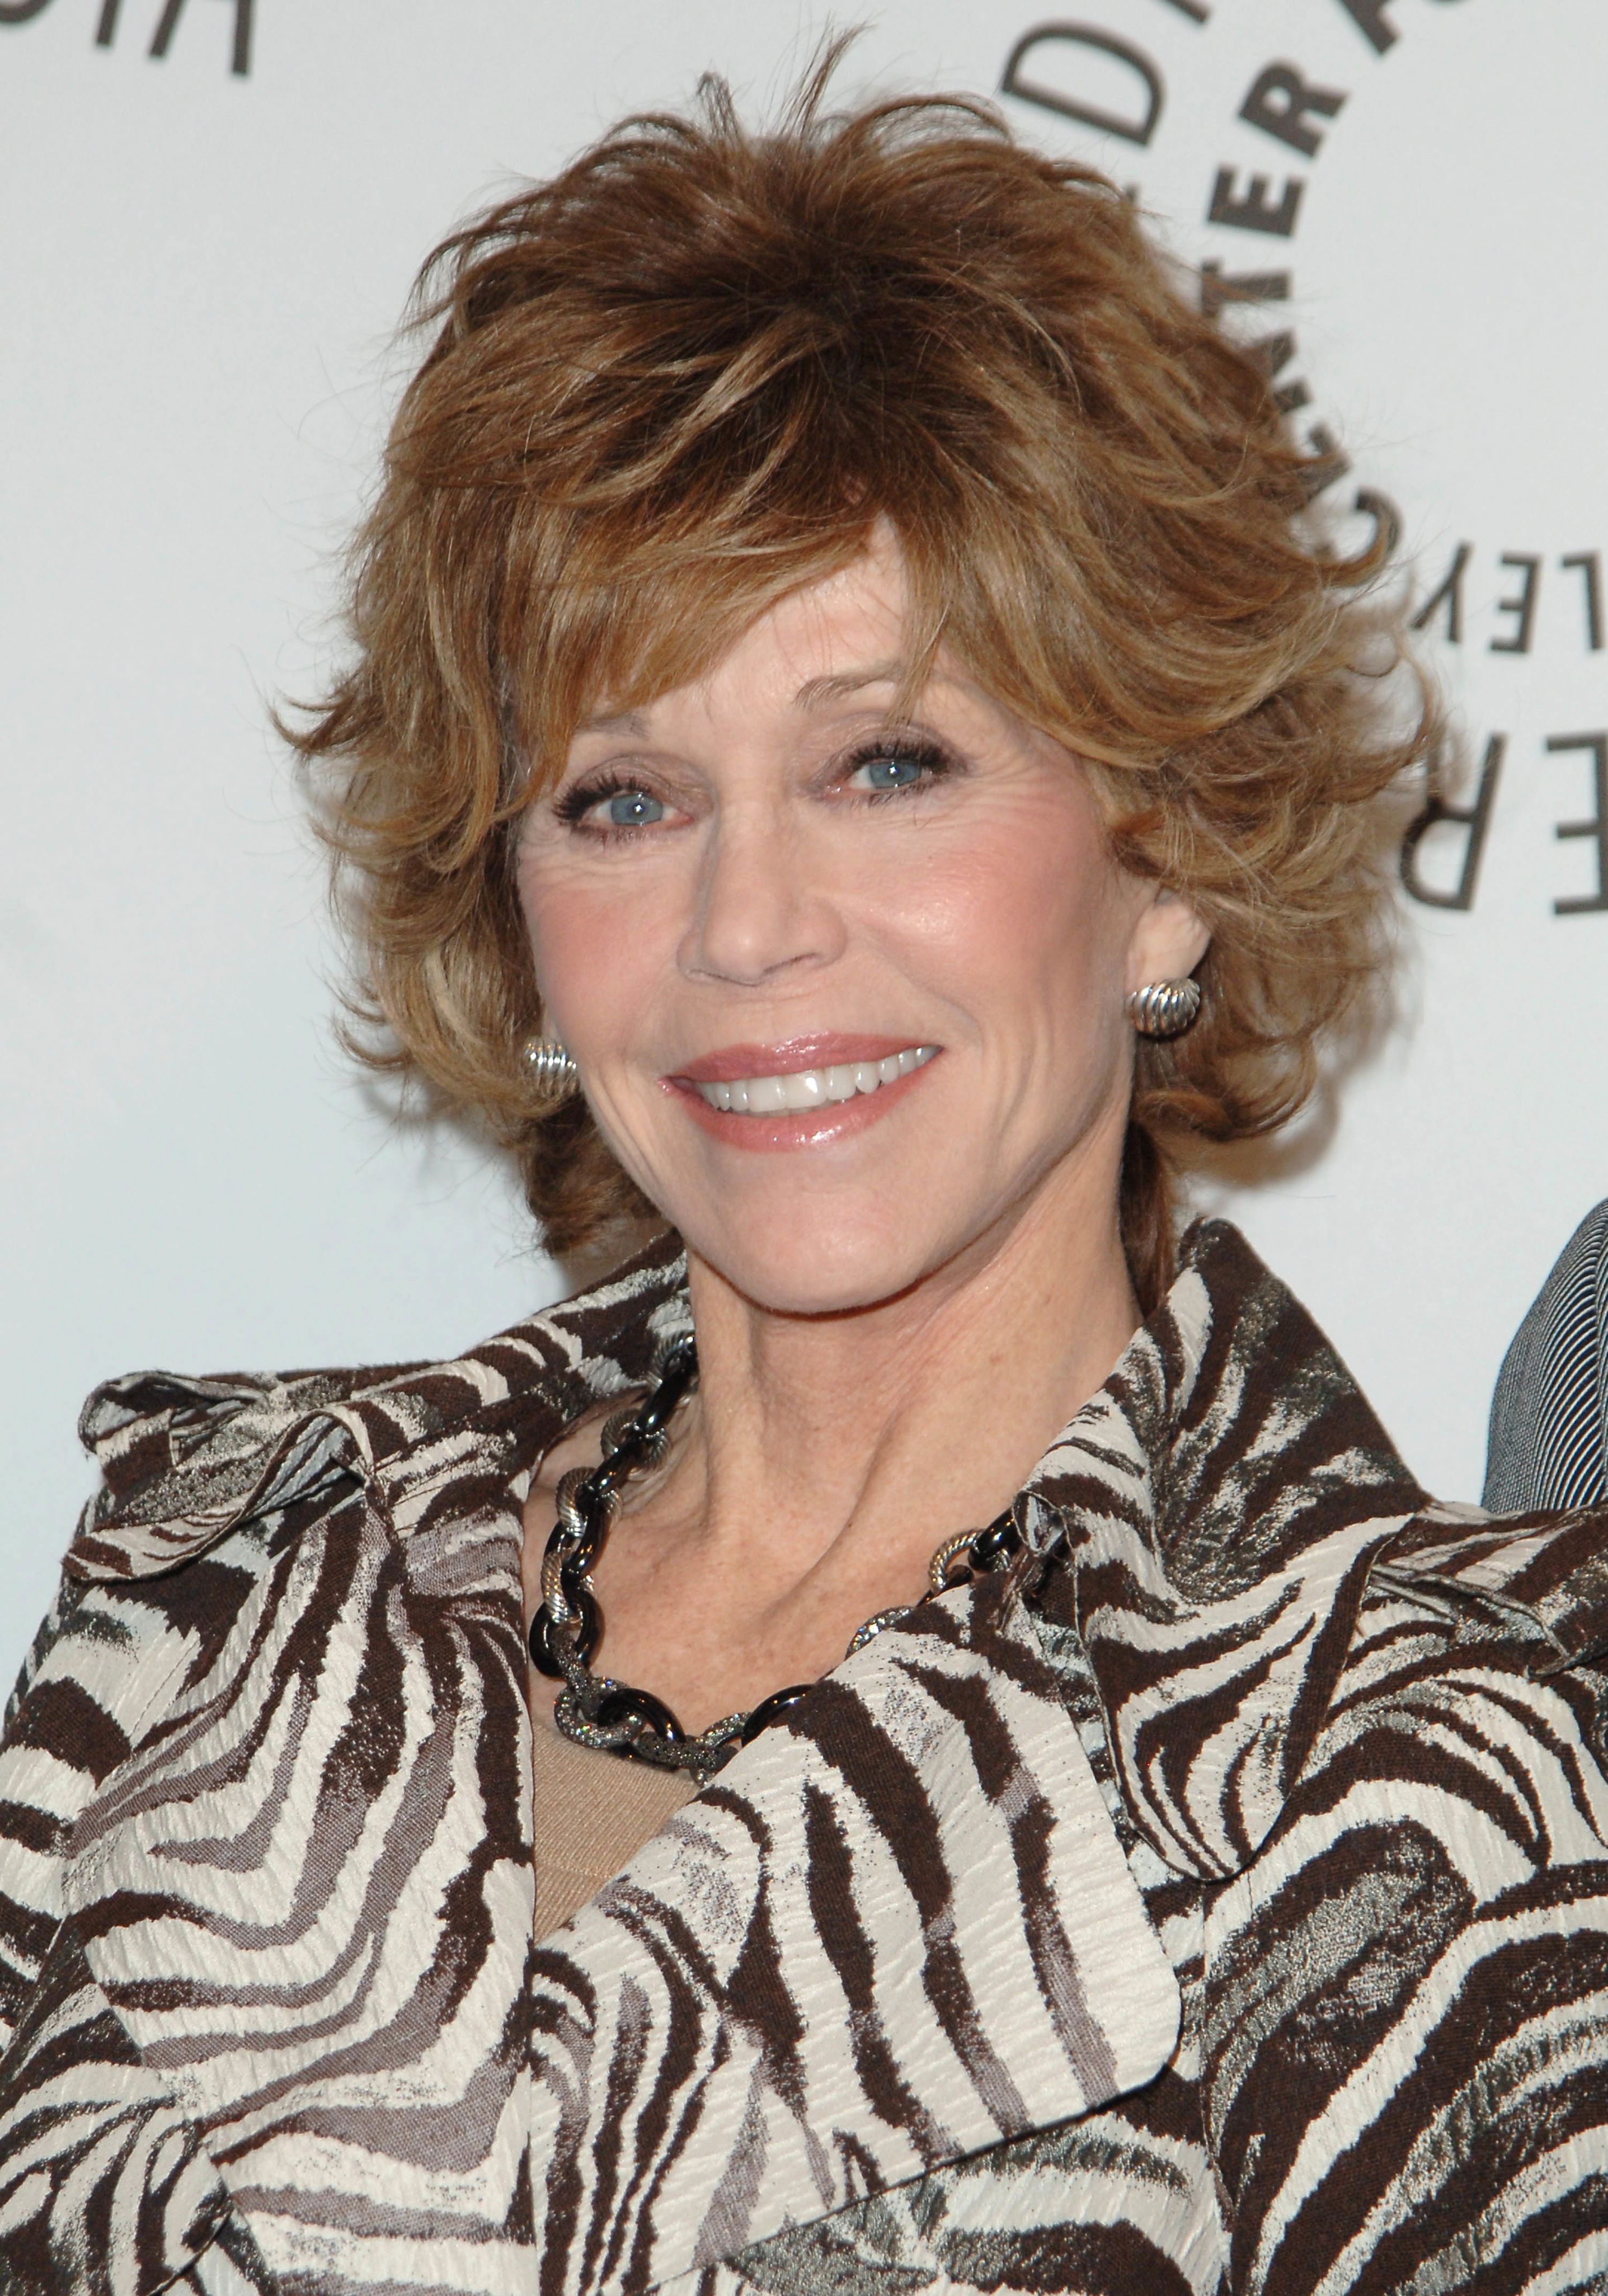 <p>In early 2010, Jane Fonda admitted to having her eyes, chin and neck done. "It was a hard decision to make, and I decided if I'm going to do it, I'm going to tell the truth," she told "Entertainment Tonight." Explained the actress-activist, "I'm writing a book about aging, so I can't write that book and not say I've had plastic surgery. And you know, I just decided it was for me -- I don't want to have bags under my eyes that make me look tired, and so forth and so on." She showed off her new look in late 2010.</p>